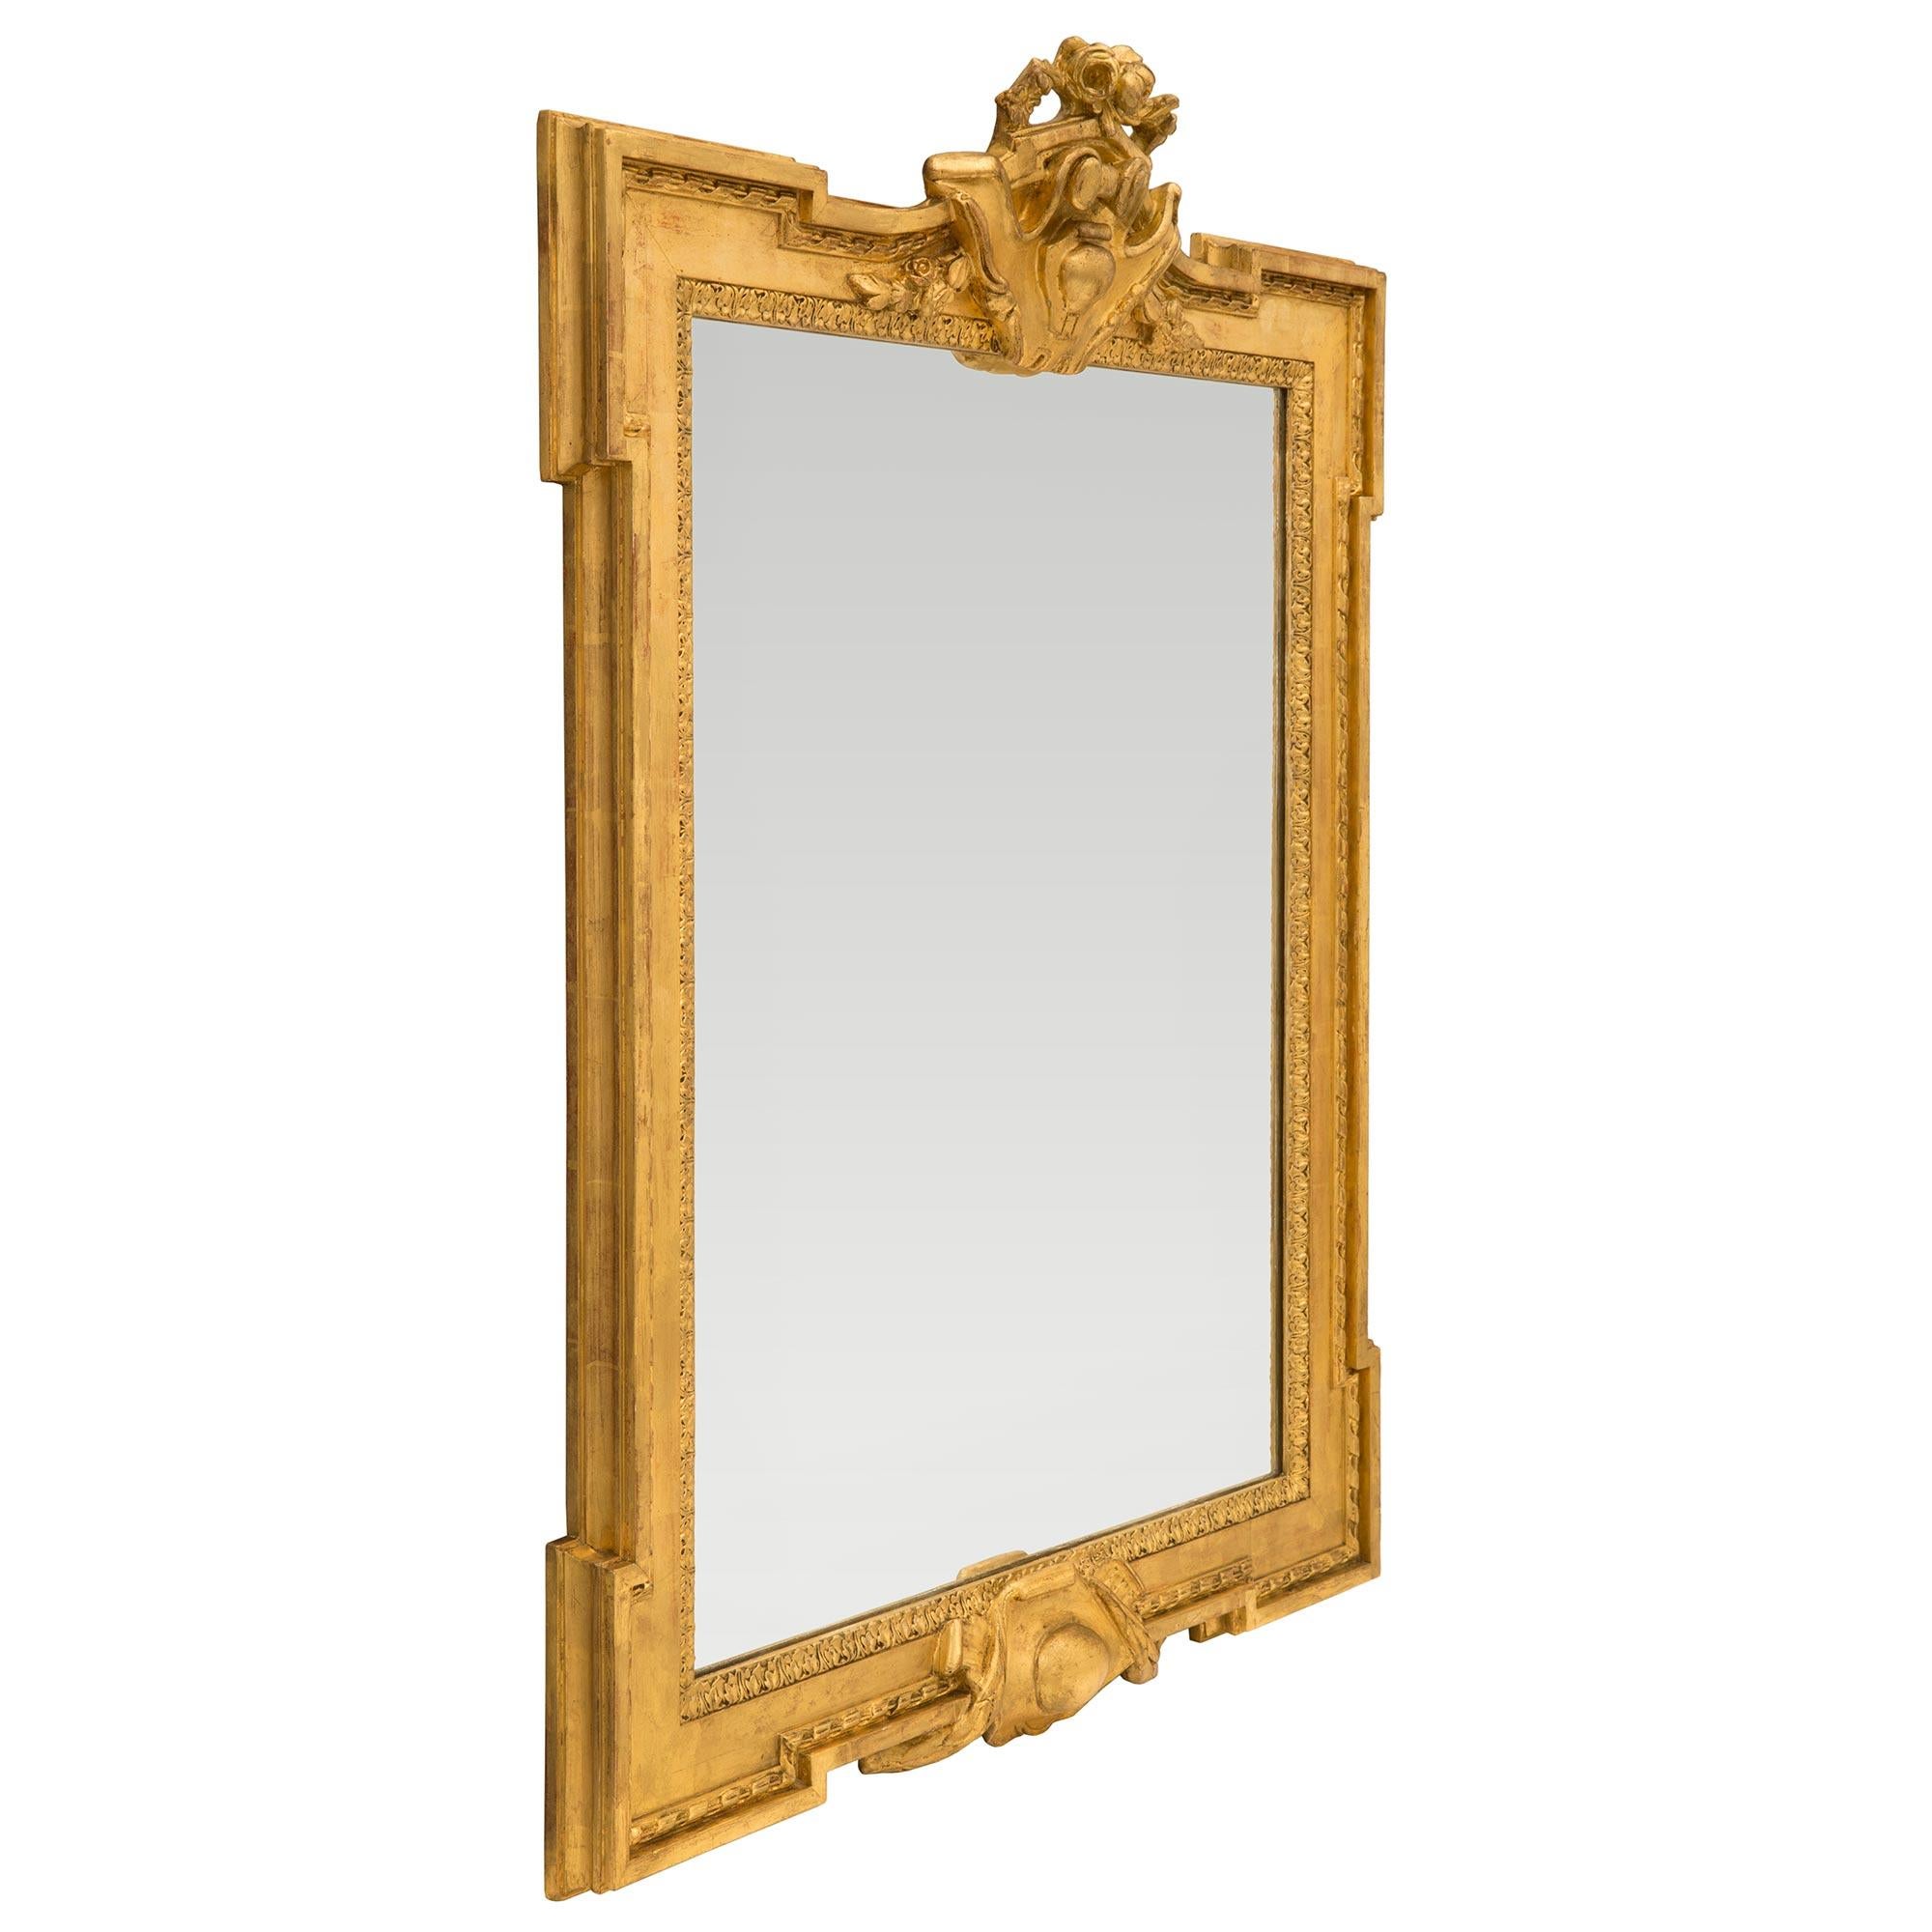 A beautiful French 19th century Louis XVI st. giltwood mirror. The mirror retains its original mirror plate set within an architectural and most decorative mottled frame with a finely carved foliate border and wrap around twisted ribbon. At the